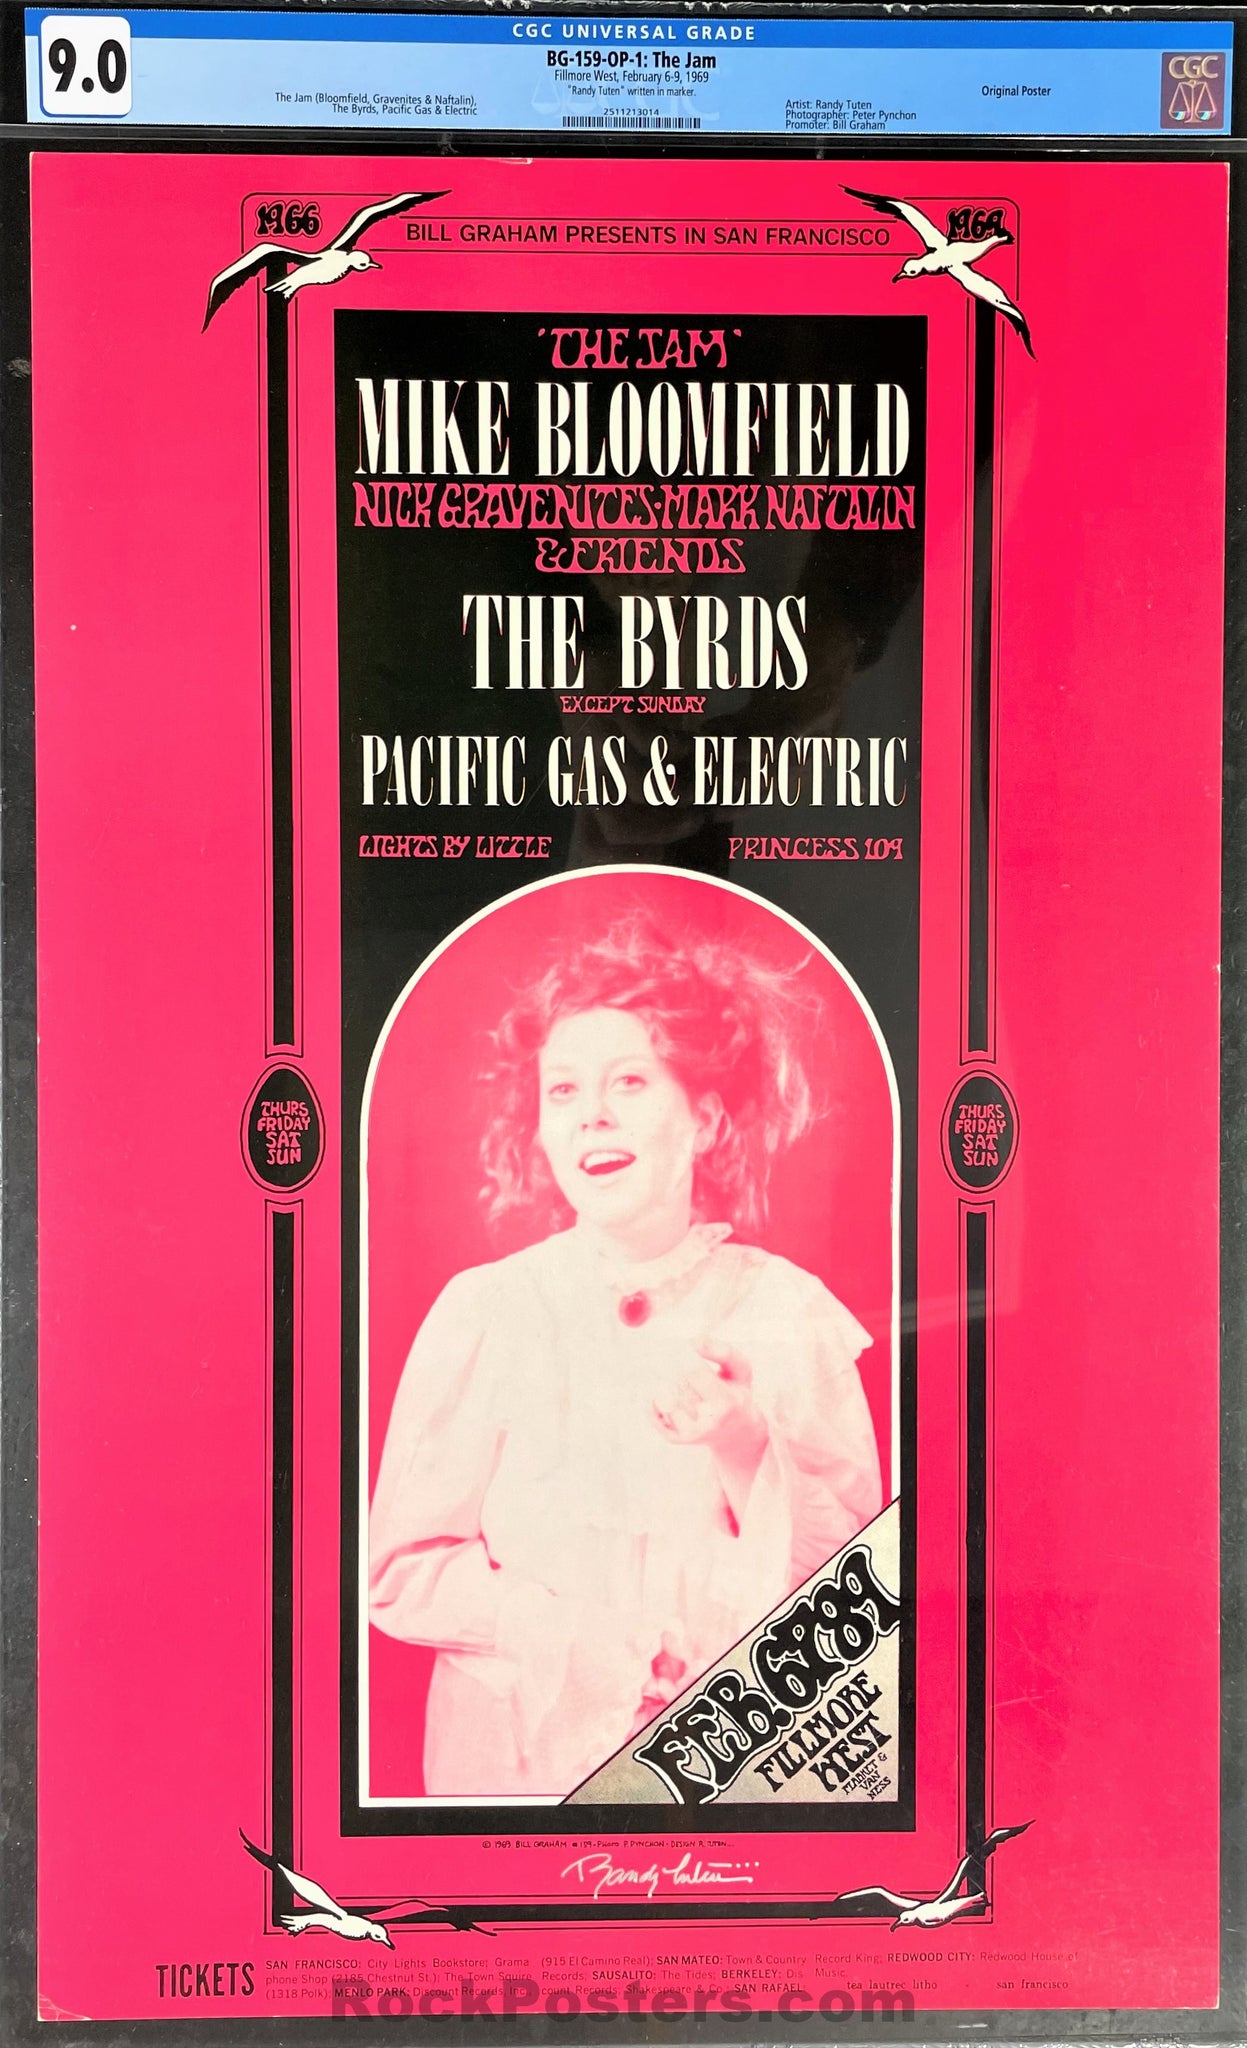 AUCTION -  BG-159 -The Byrds - 1969 Poster - Randy Tuten Signed - Fillmore West - CGC Graded 9.0